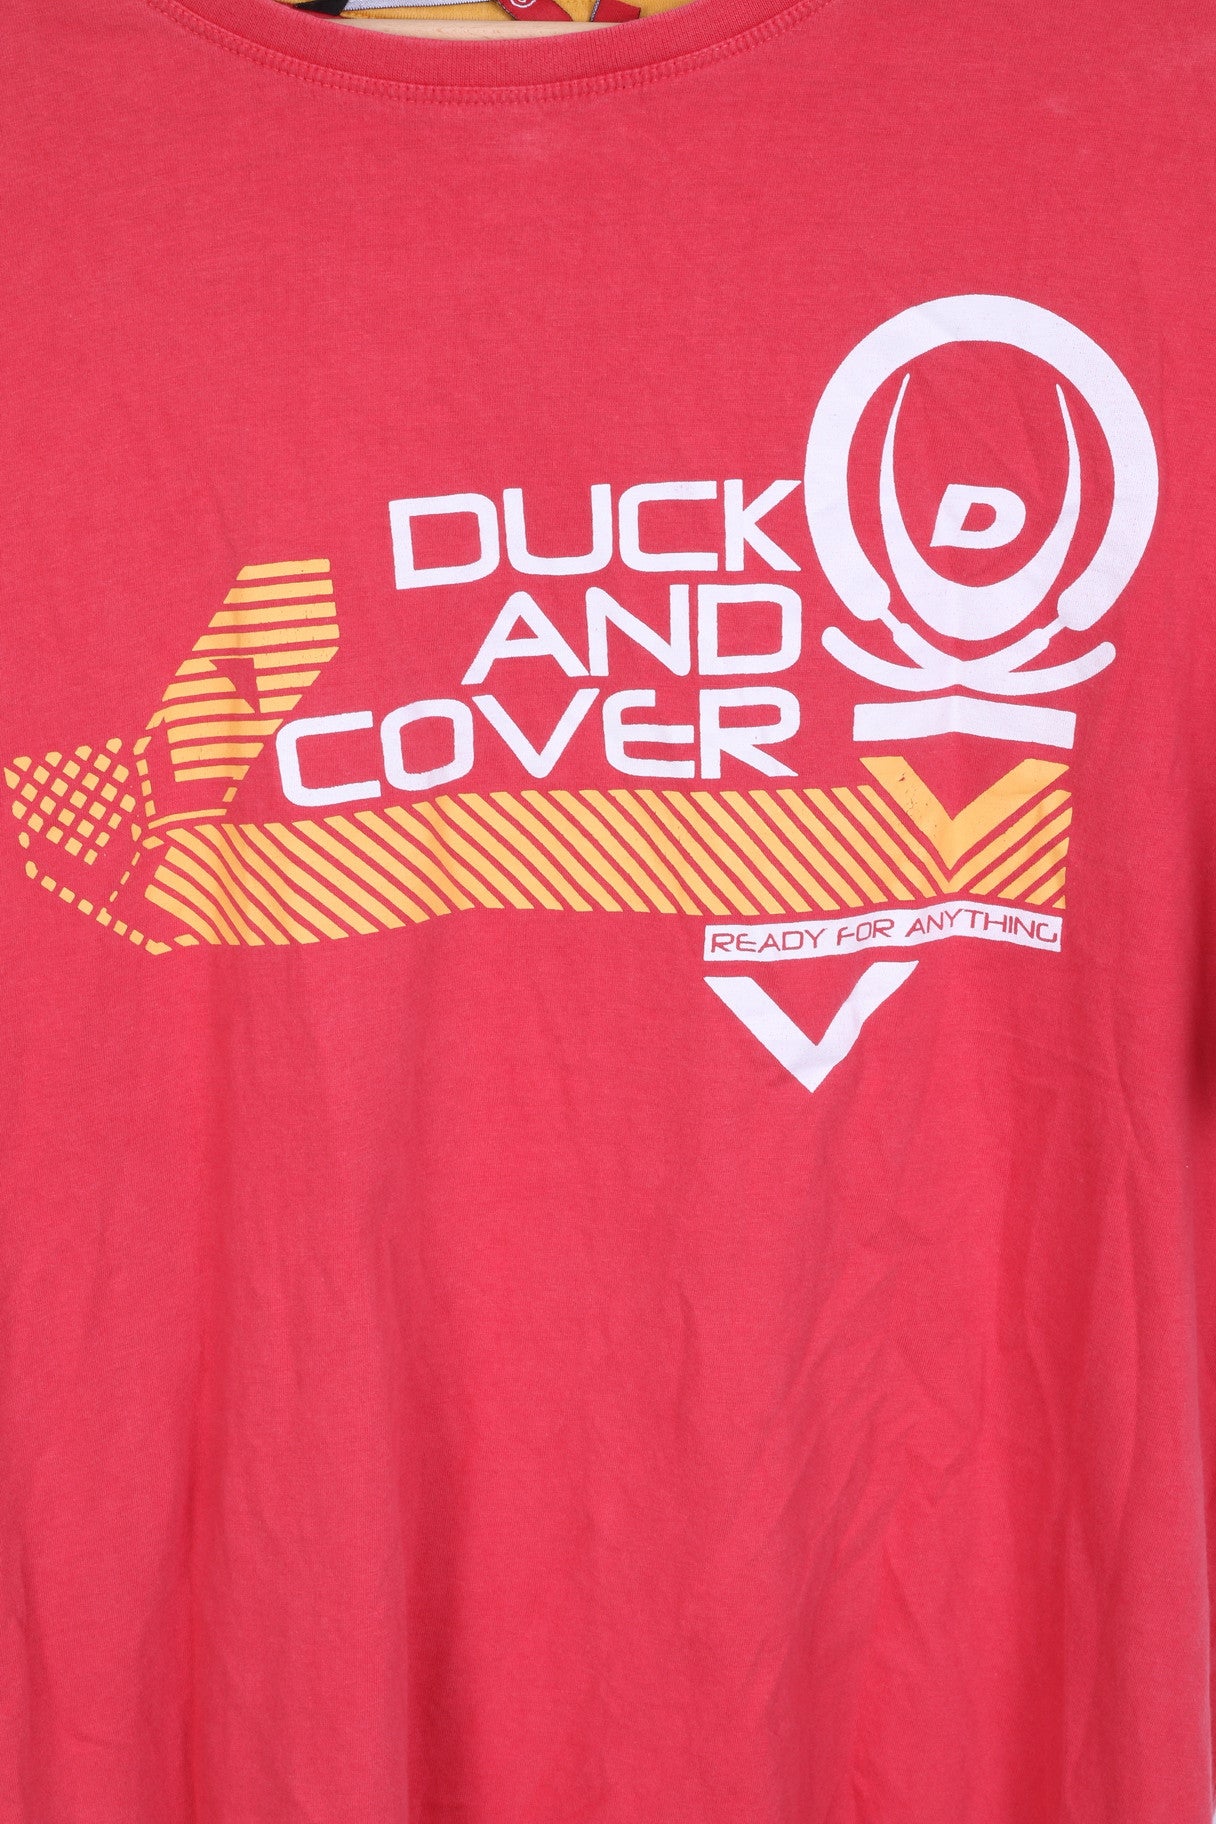 DUCK AND COVER Mens XL T-Shirt Red Cotton  Logo Crew Neck Short Sleeve